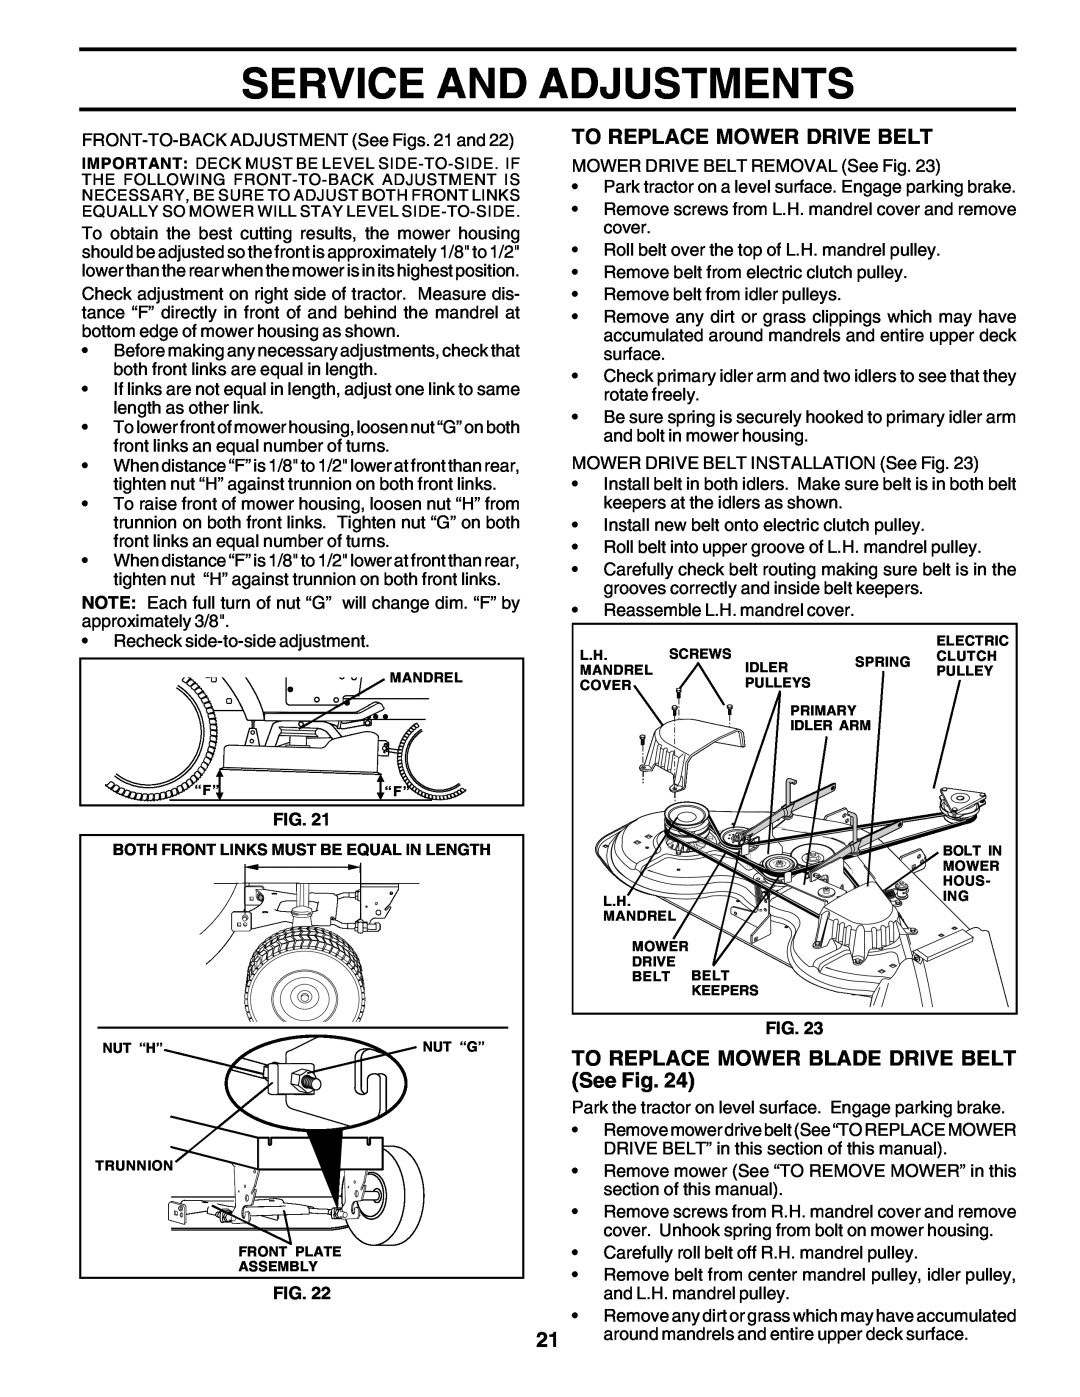 Poulan 178497 owner manual Service And Adjustments, To Replace Mower Drive Belt, TO REPLACE MOWER BLADE DRIVE BELT See Fig 